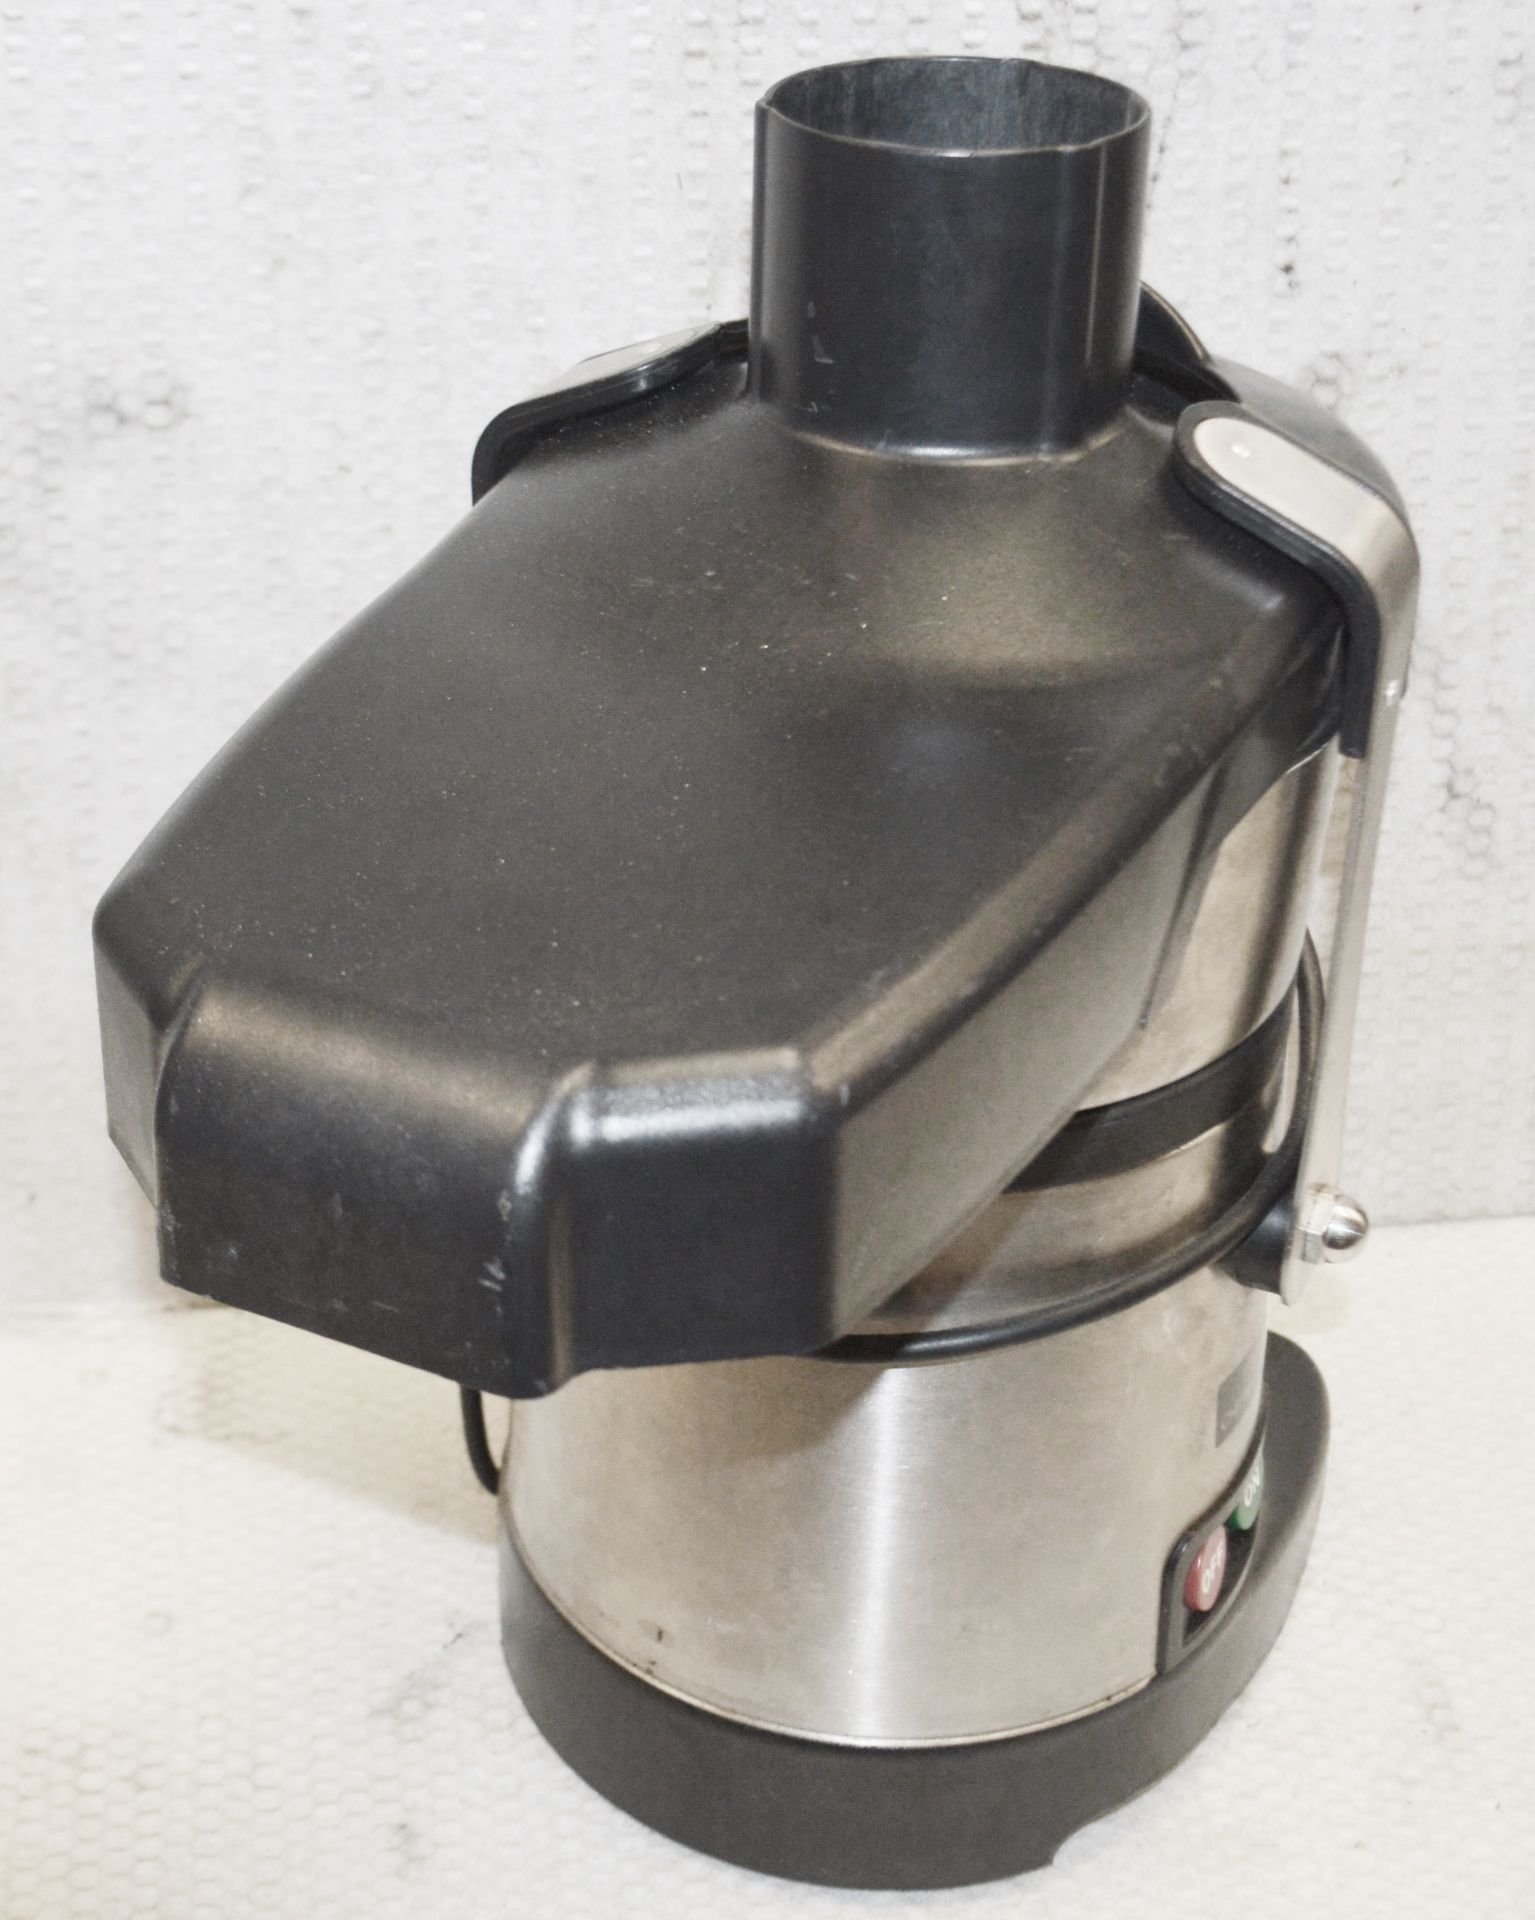 1 x Chef Master Automatic Juicer - Recently Removed From A Commercial Restaurant Environment - CL011 - Image 10 of 13